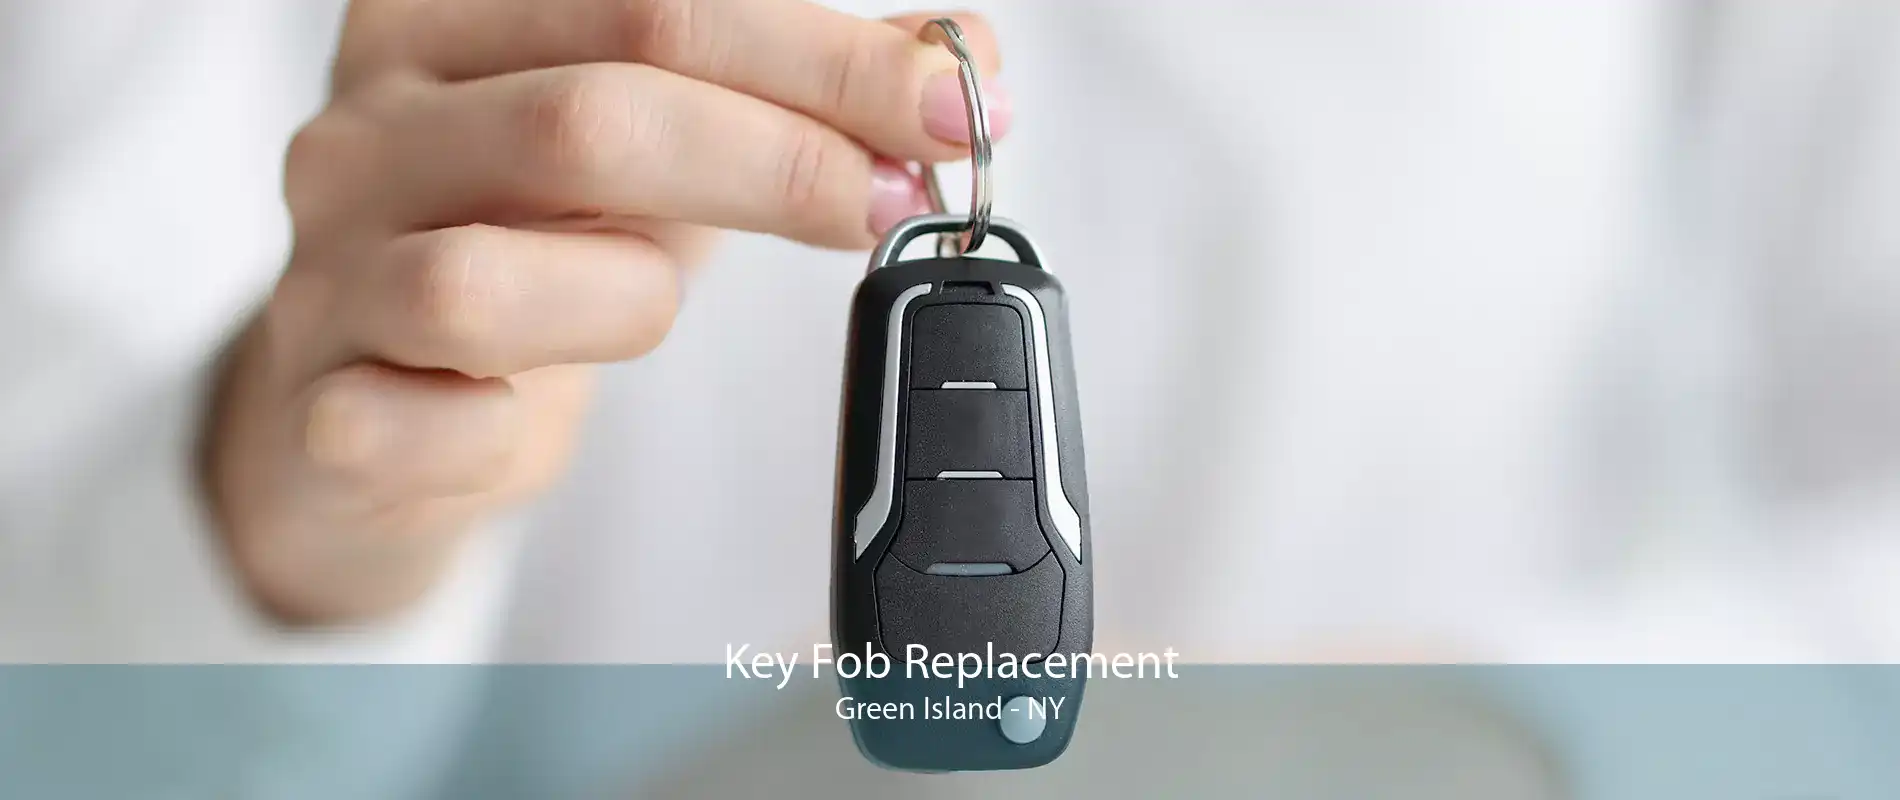 Key Fob Replacement Green Island - NY